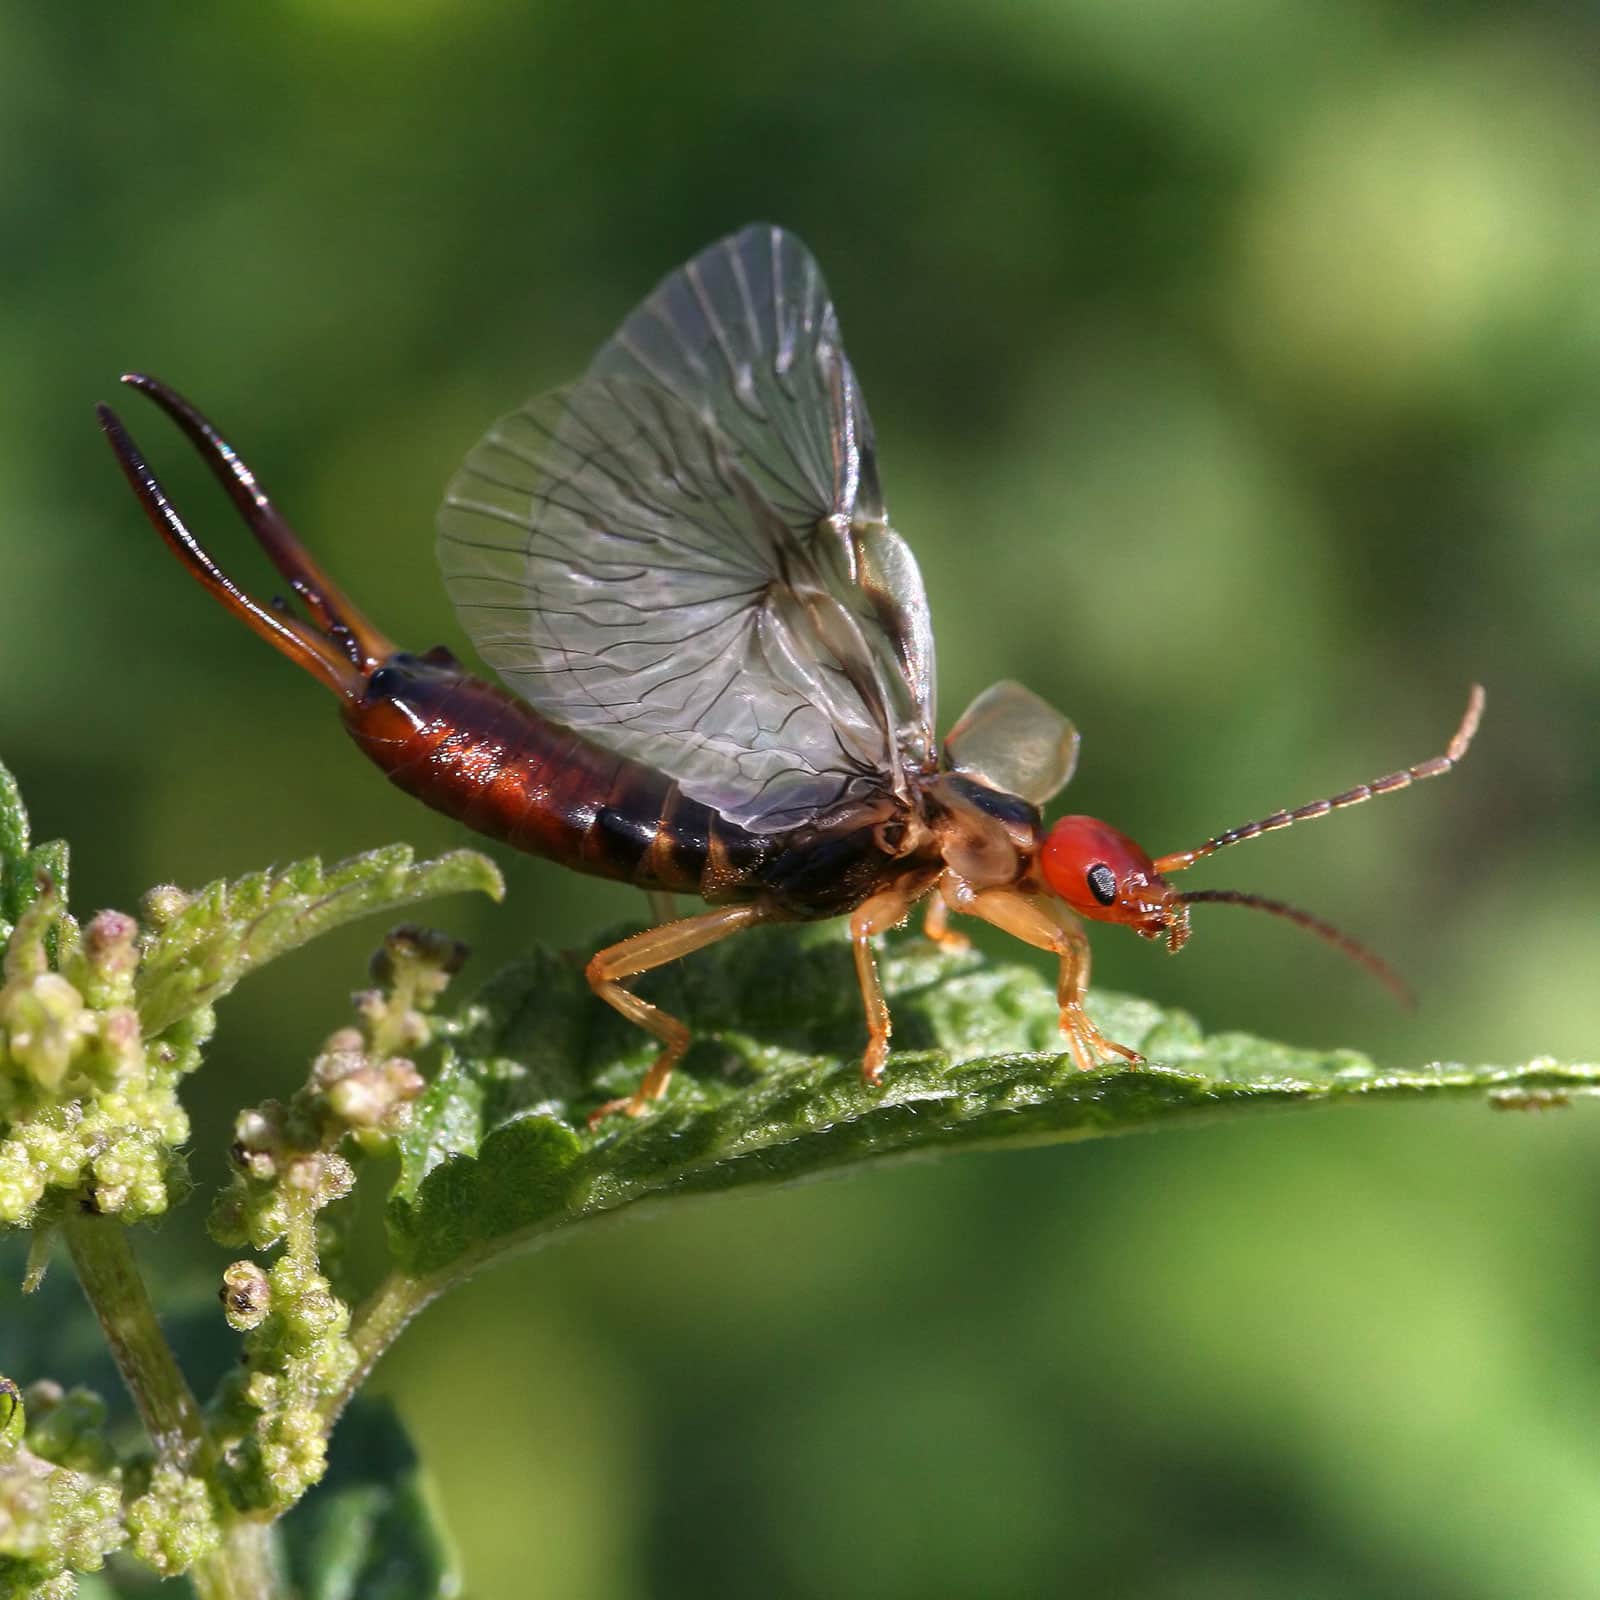 Earwig with wings fanned out